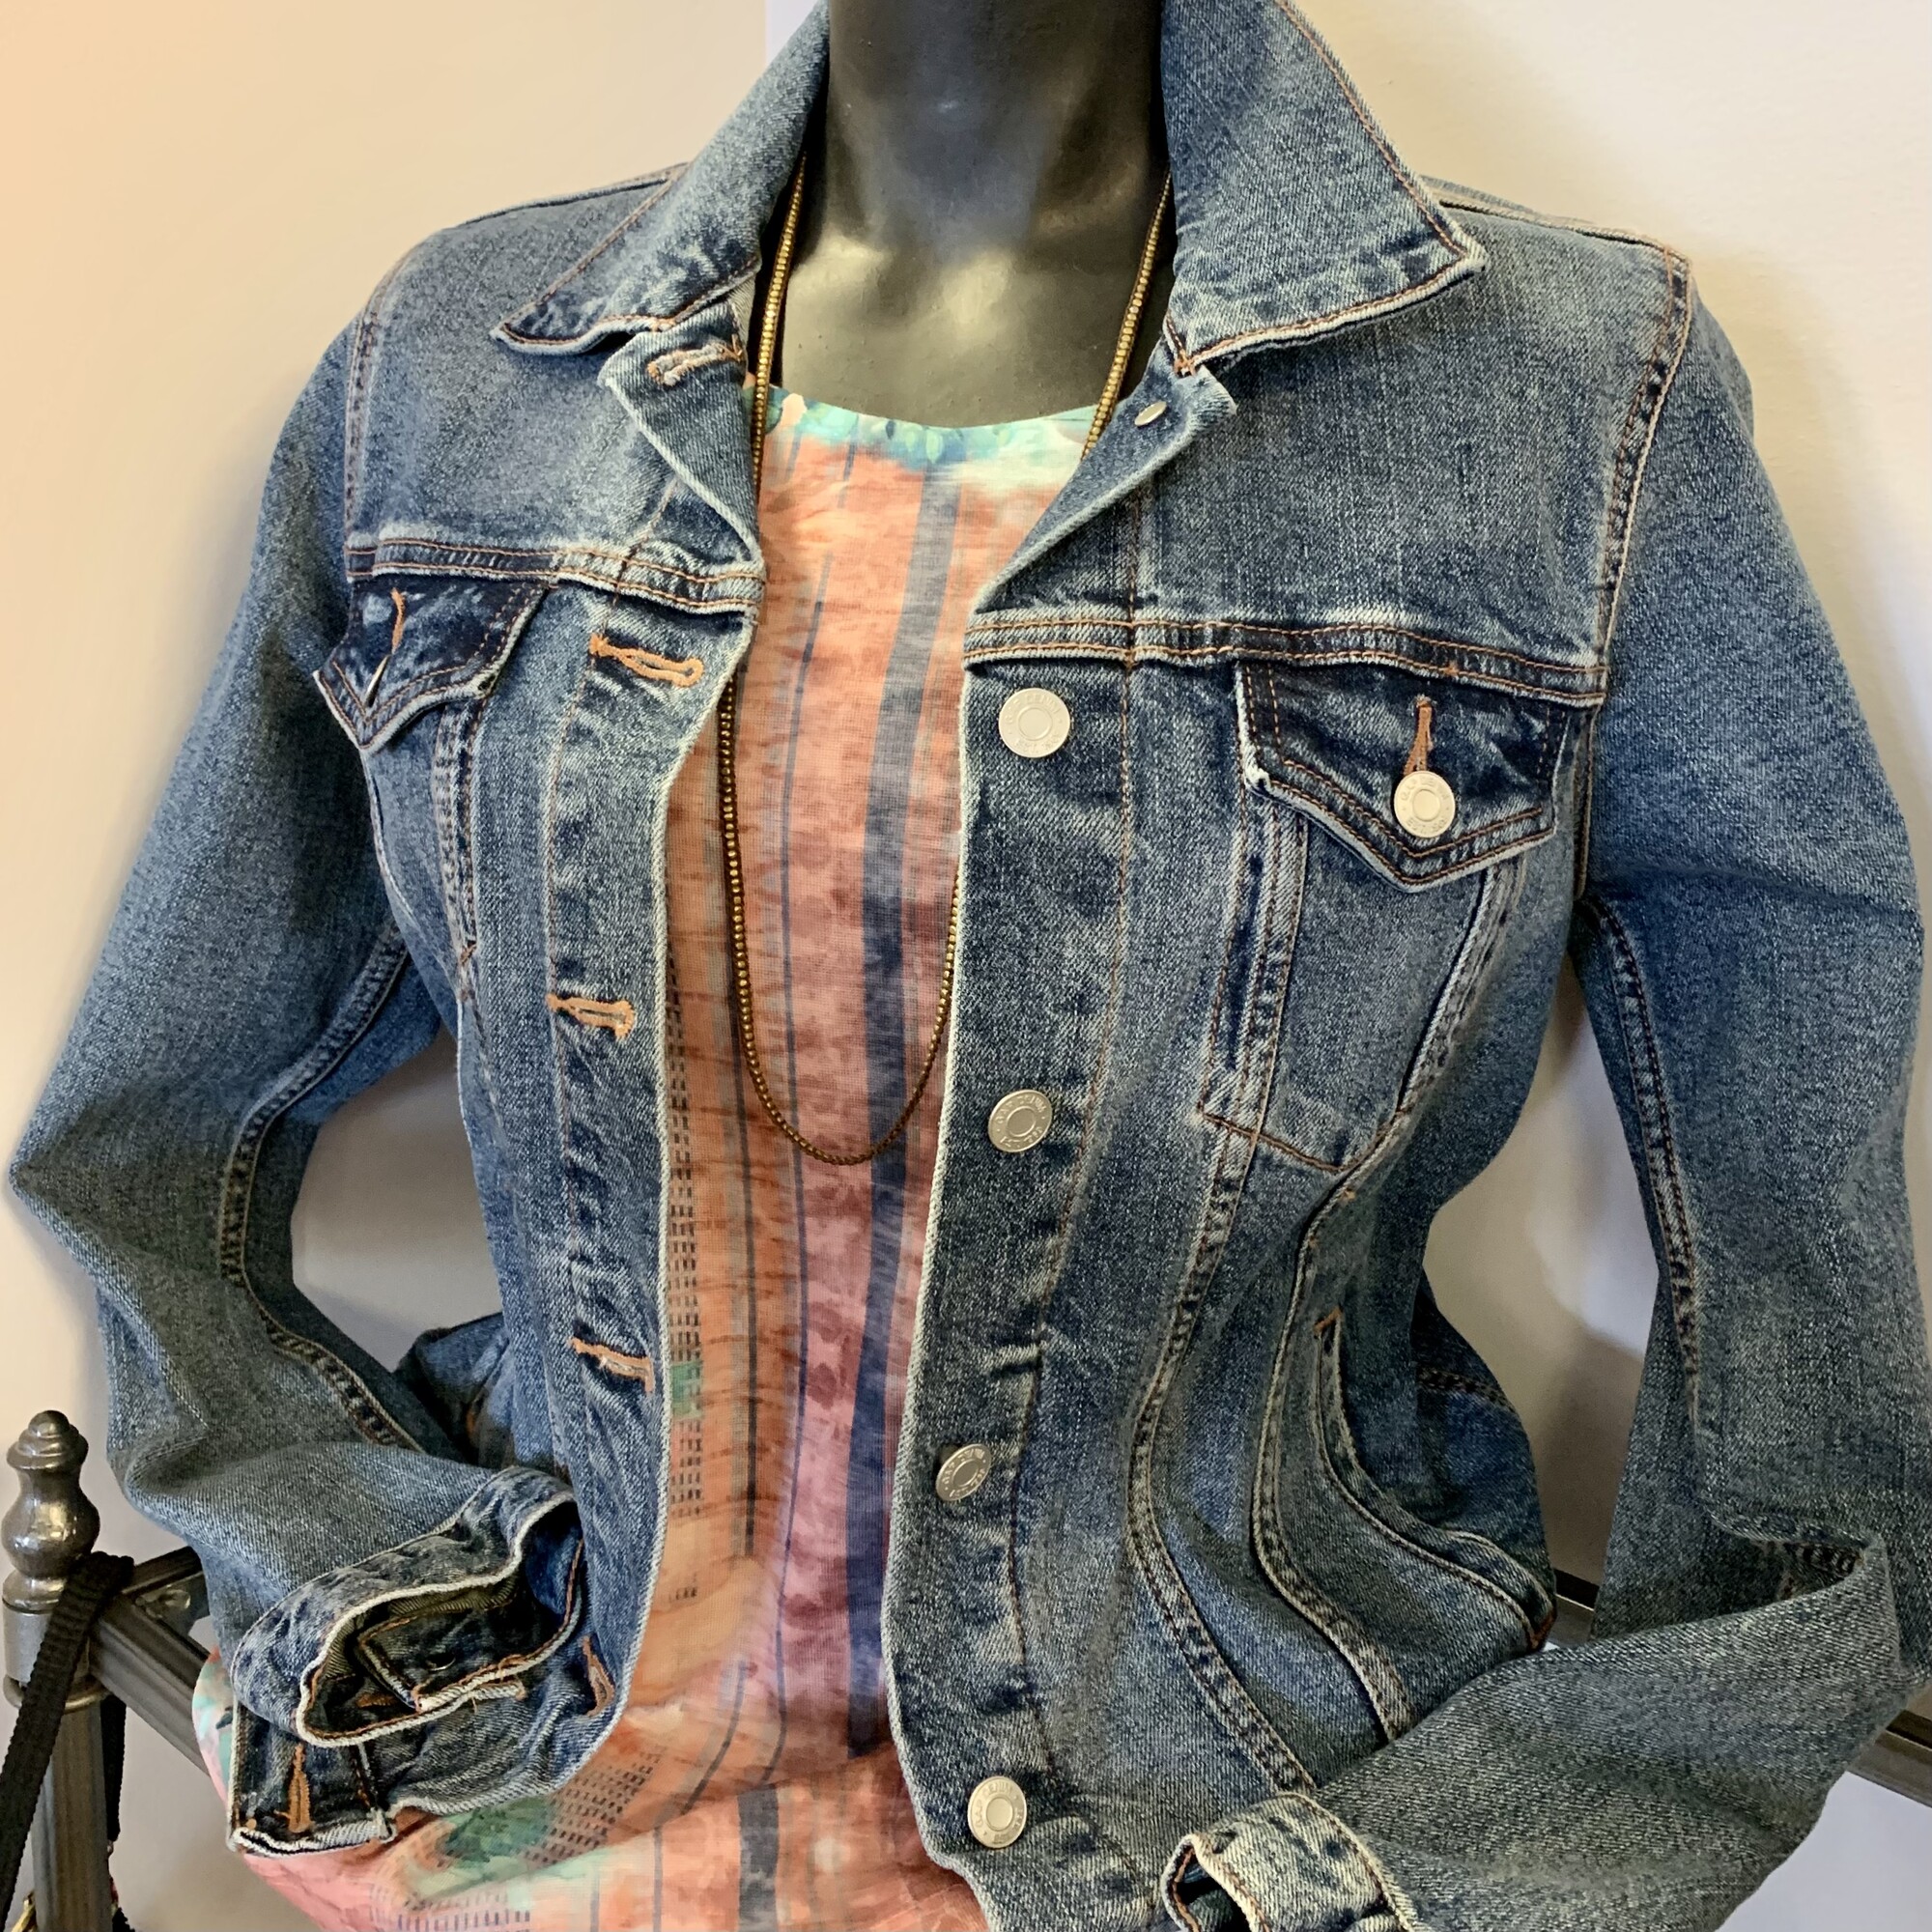 Gap Denim Jacket,
Colour: Blue,
Size: 8,

Please contact the store if you want this item shipped.